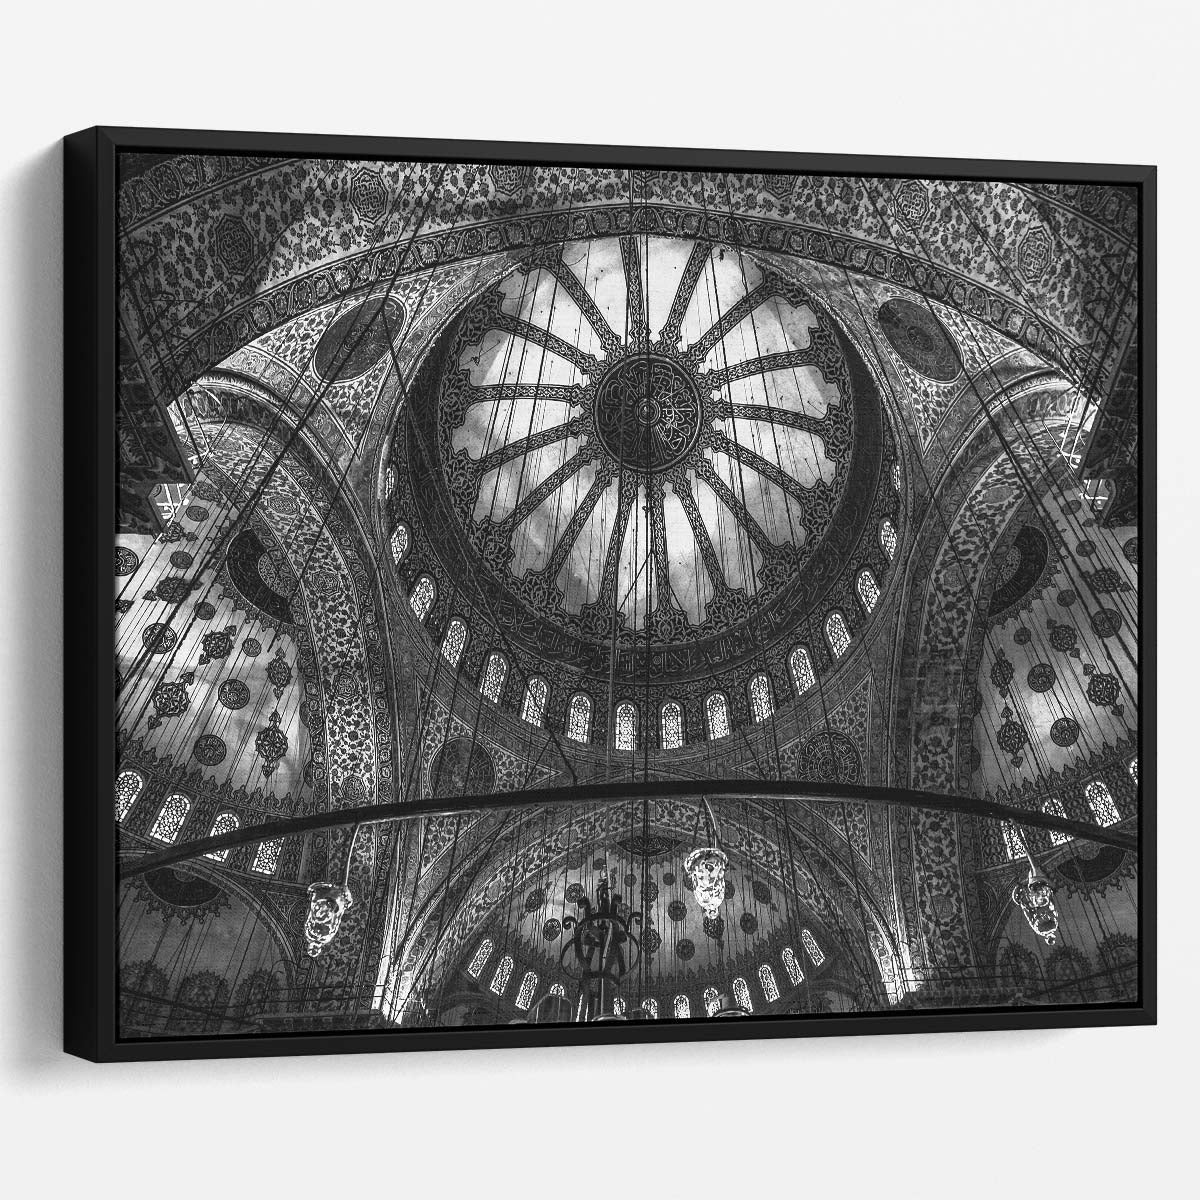 Istanbul's Iconic Blue Mosque Panoramic Wall Art by Luxuriance Designs. Made in USA.